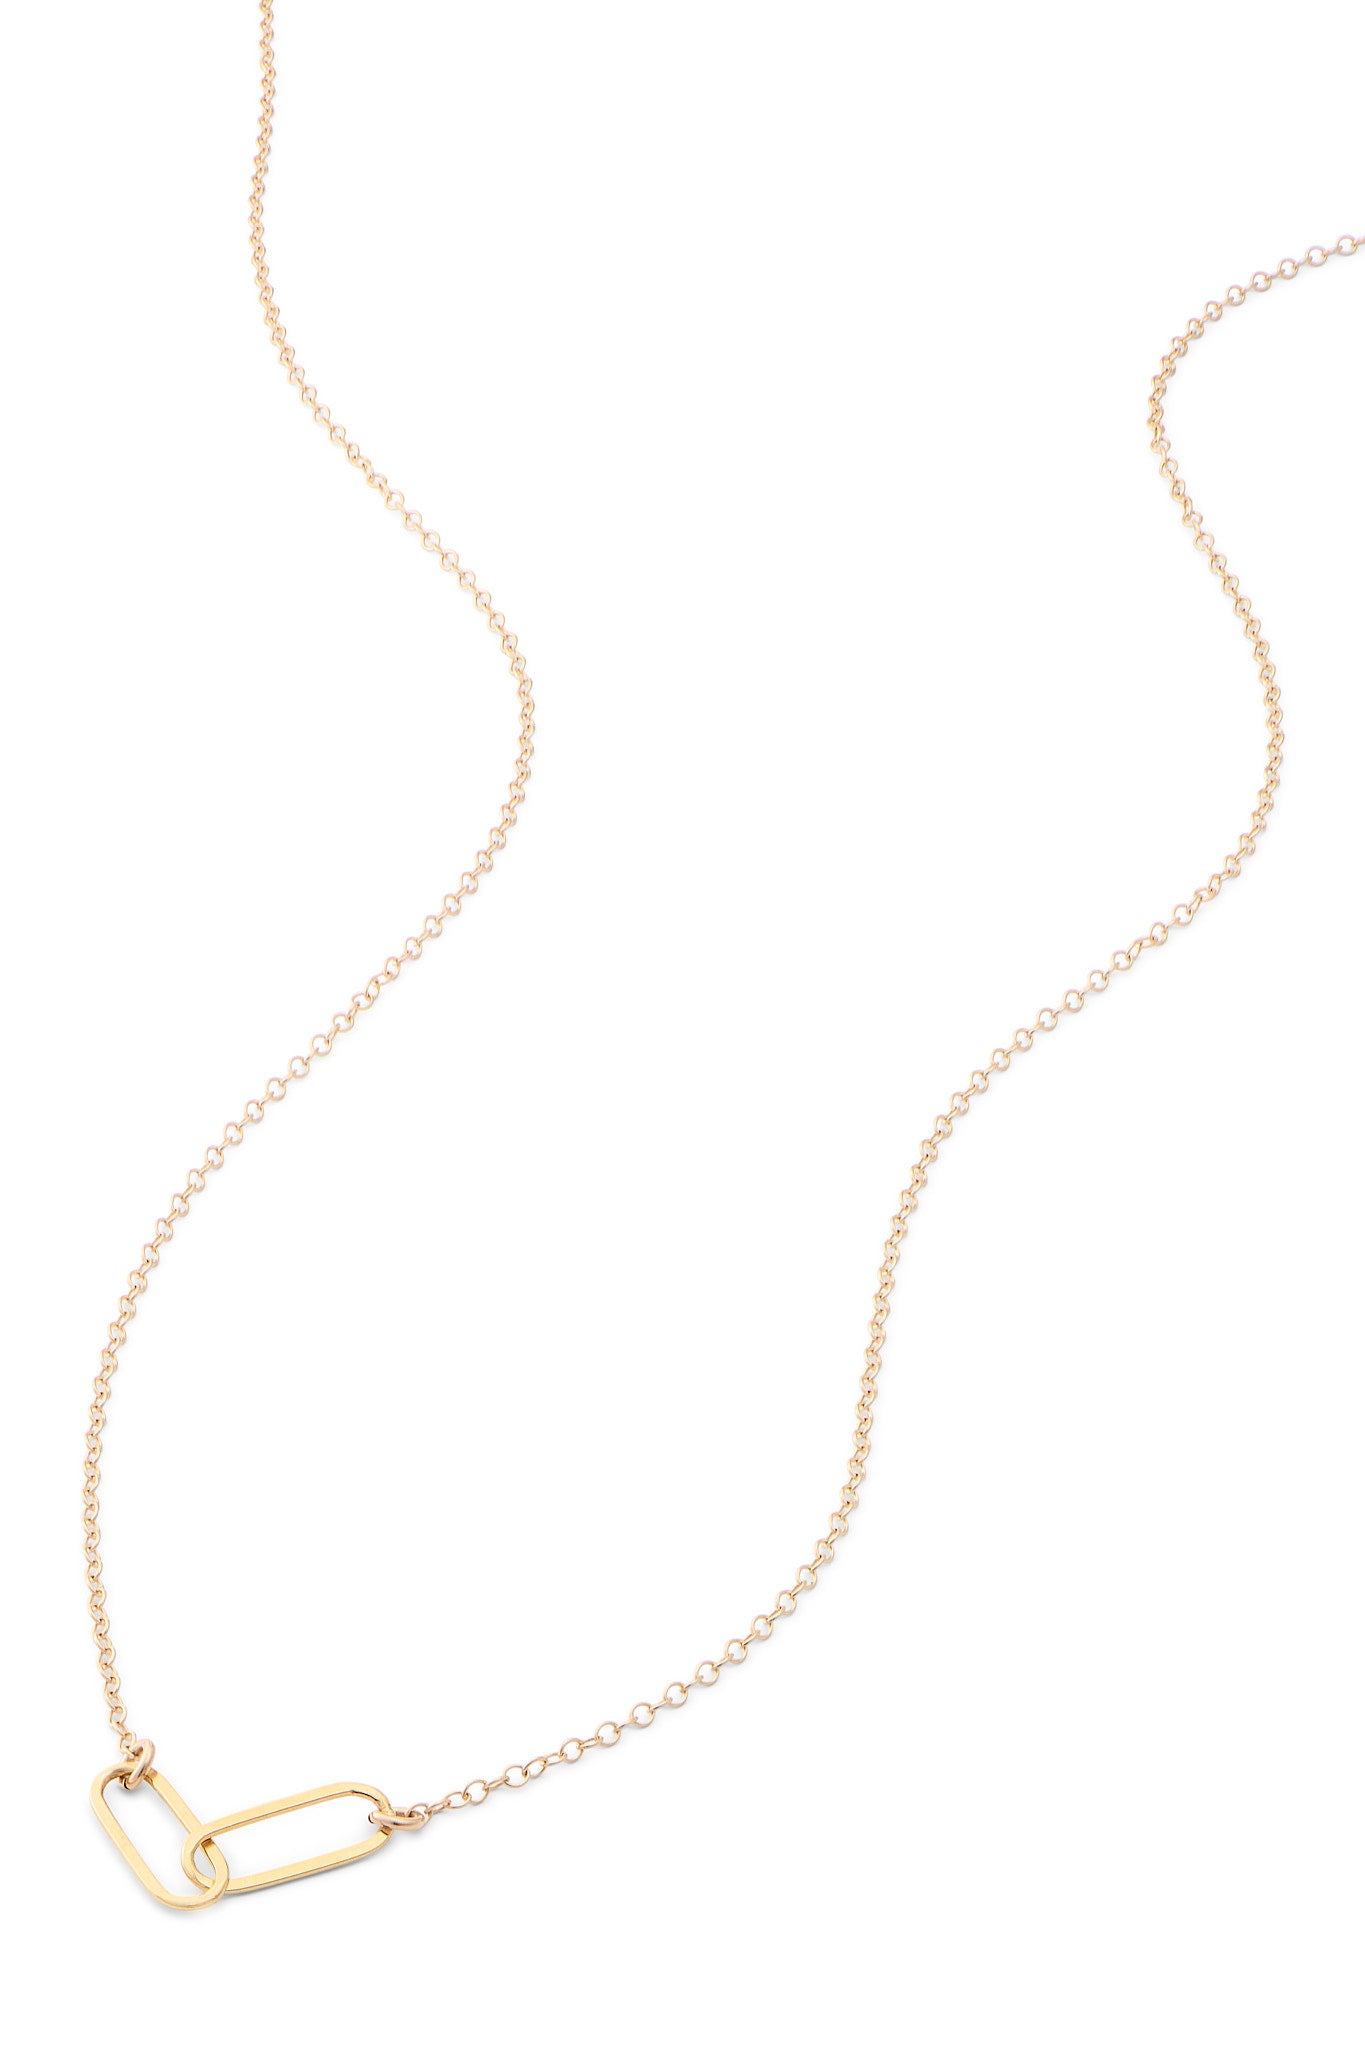 Kinfolk Necklace (available with 2-5 links)